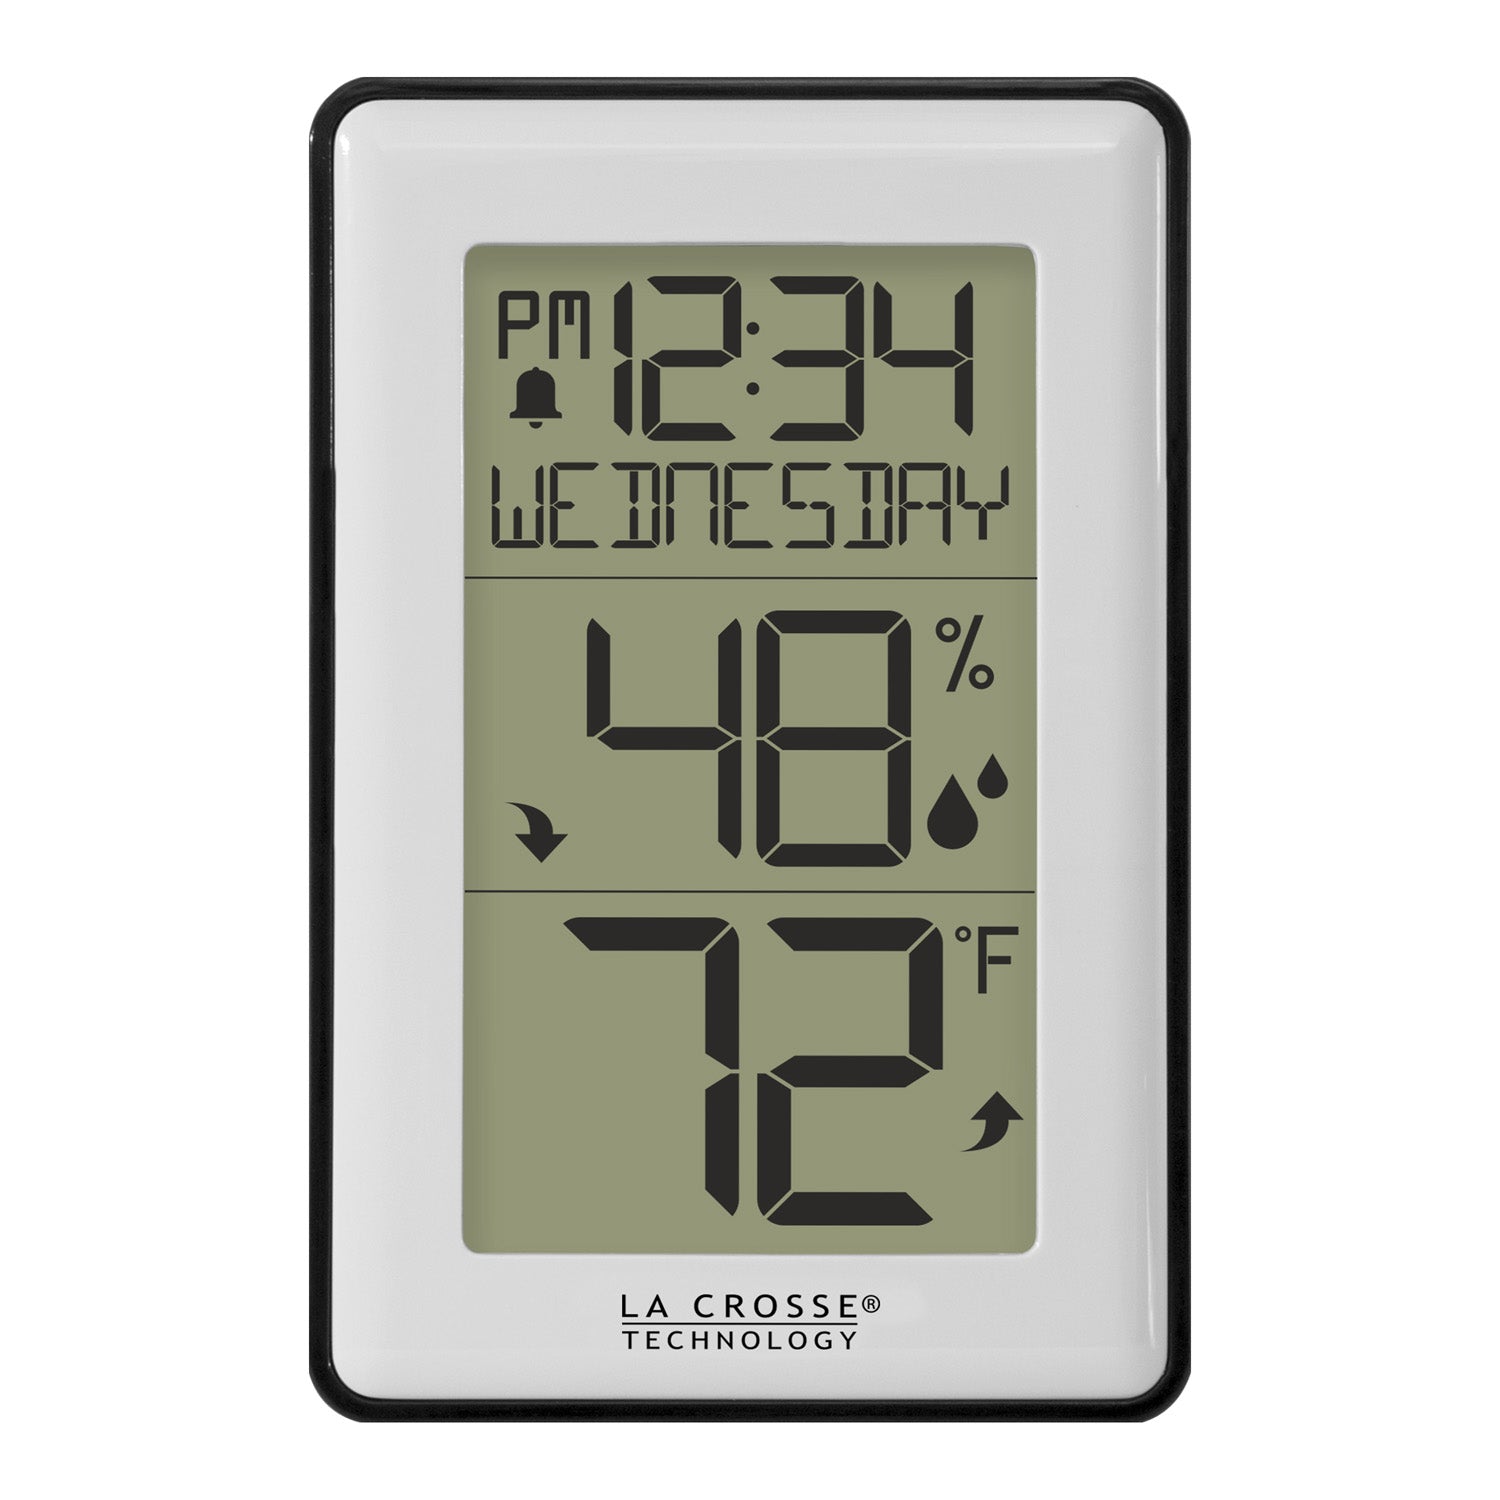 Wireless Digital Thermometer with Outdoor Temperature and Humidity